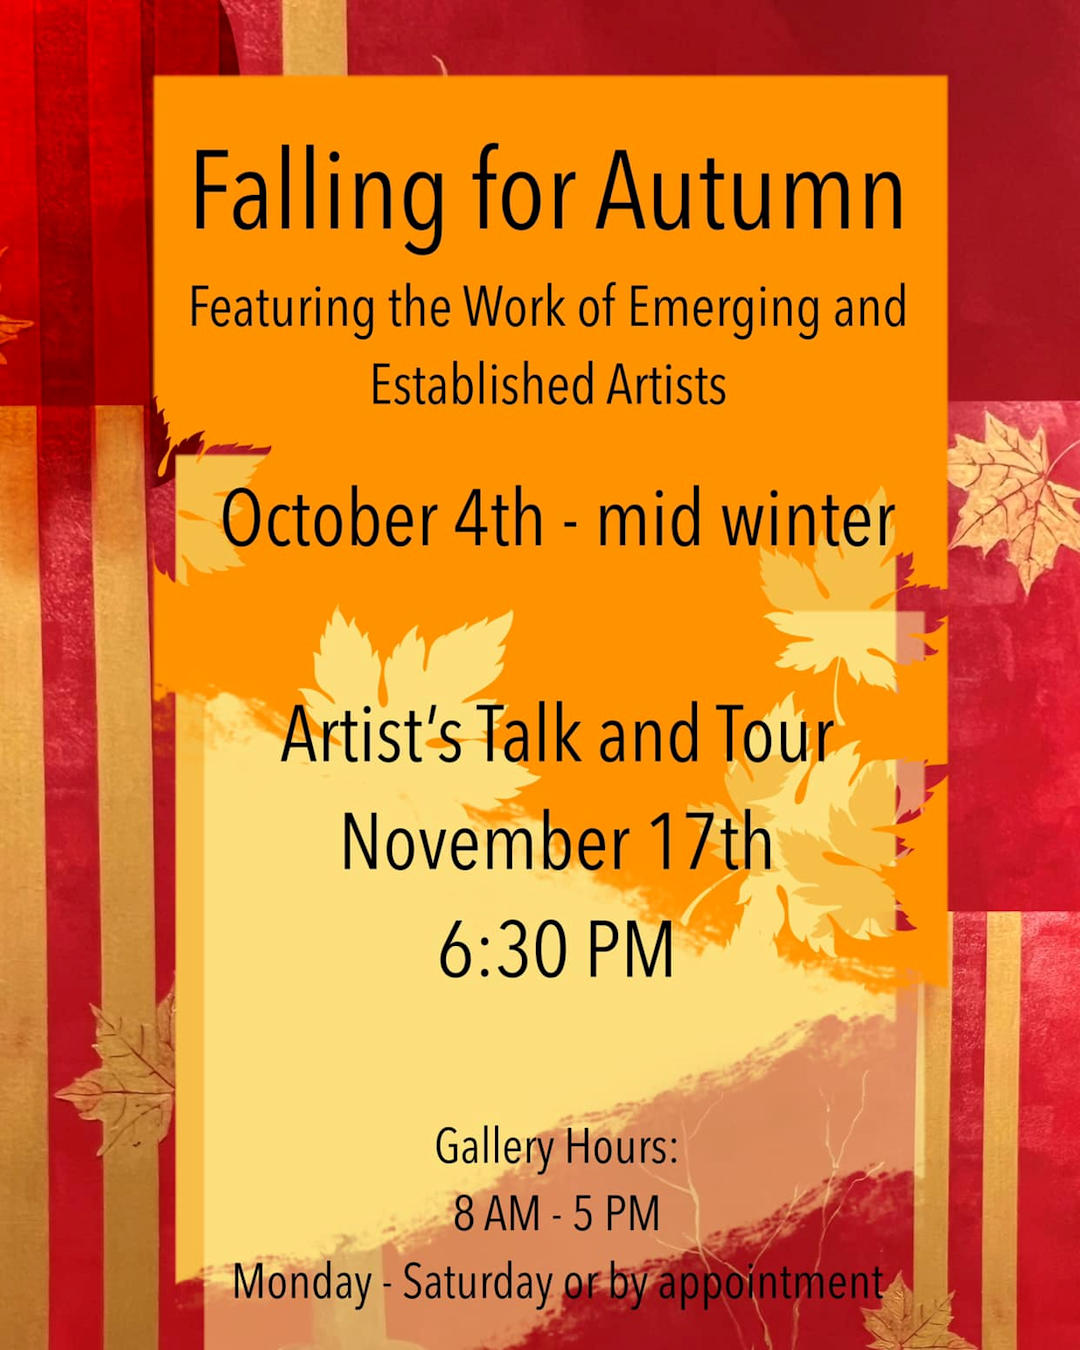 Falling for Autumn â€” Gallery 635